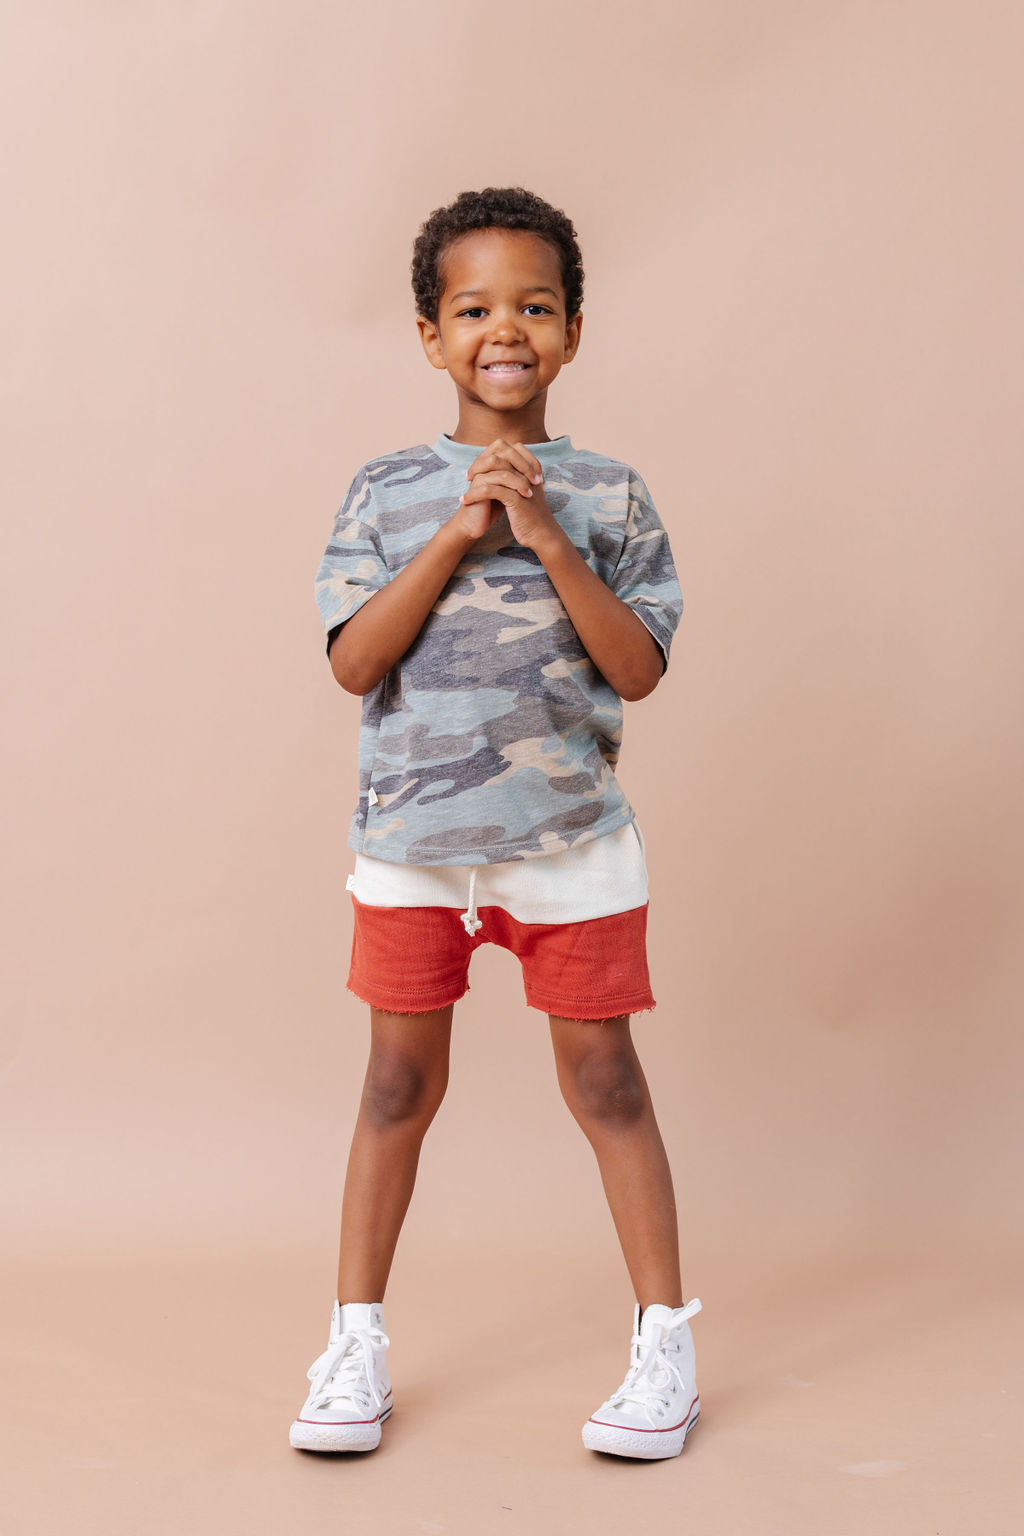 boy shorts - natural tri blend and barn red